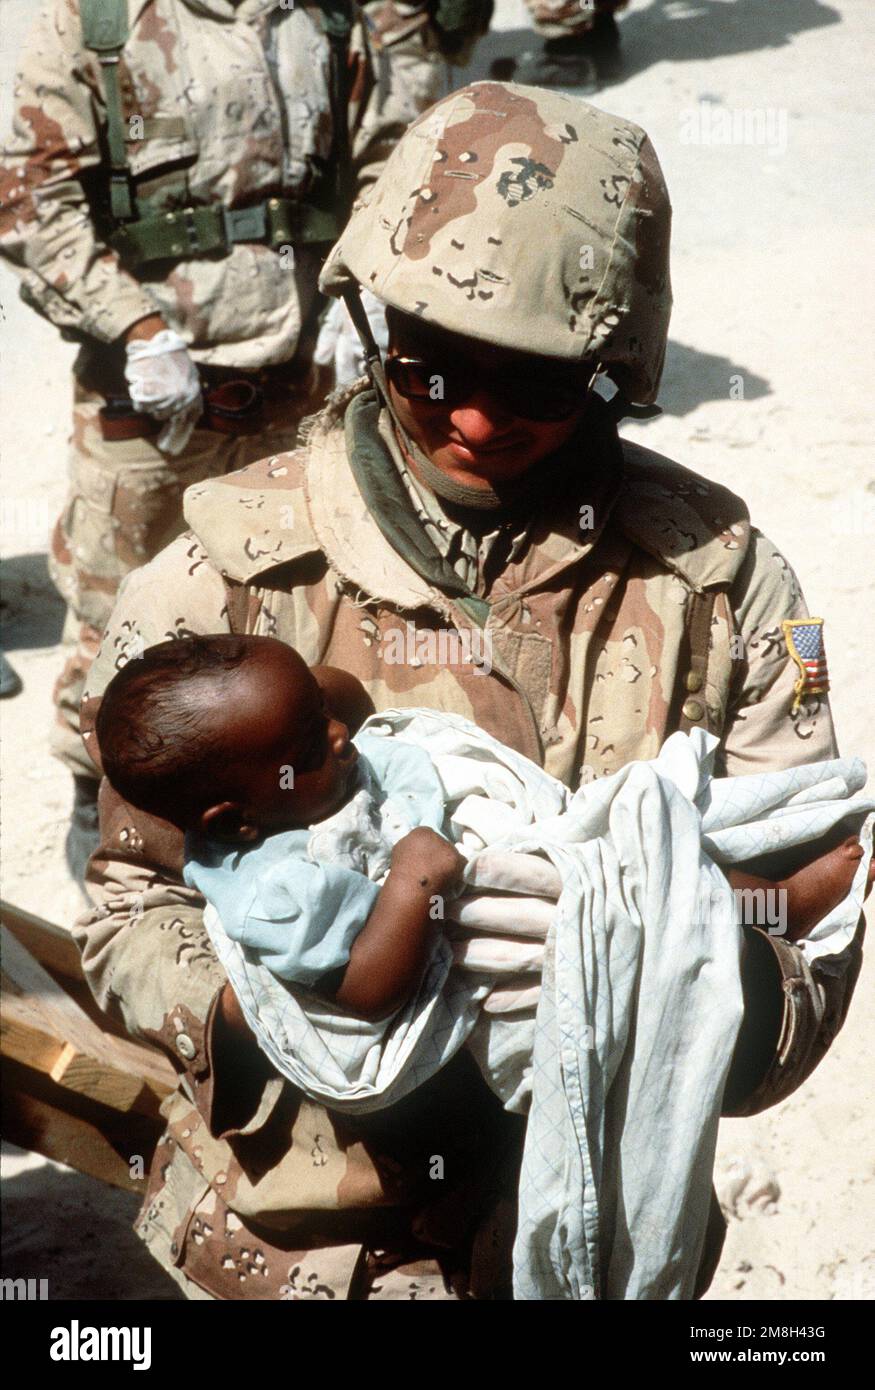 A Navy corpsman, assigned to Combat Service Support Detachment 15 (CSSD-15), examines a Somali infant while participating in a medical civic action program during the multinational relief effort Operation Restore Hope. Subject Operation/Series: RESTORE HOPE Base: Mogadishu Country: Somalia (SOM) Stock Photo